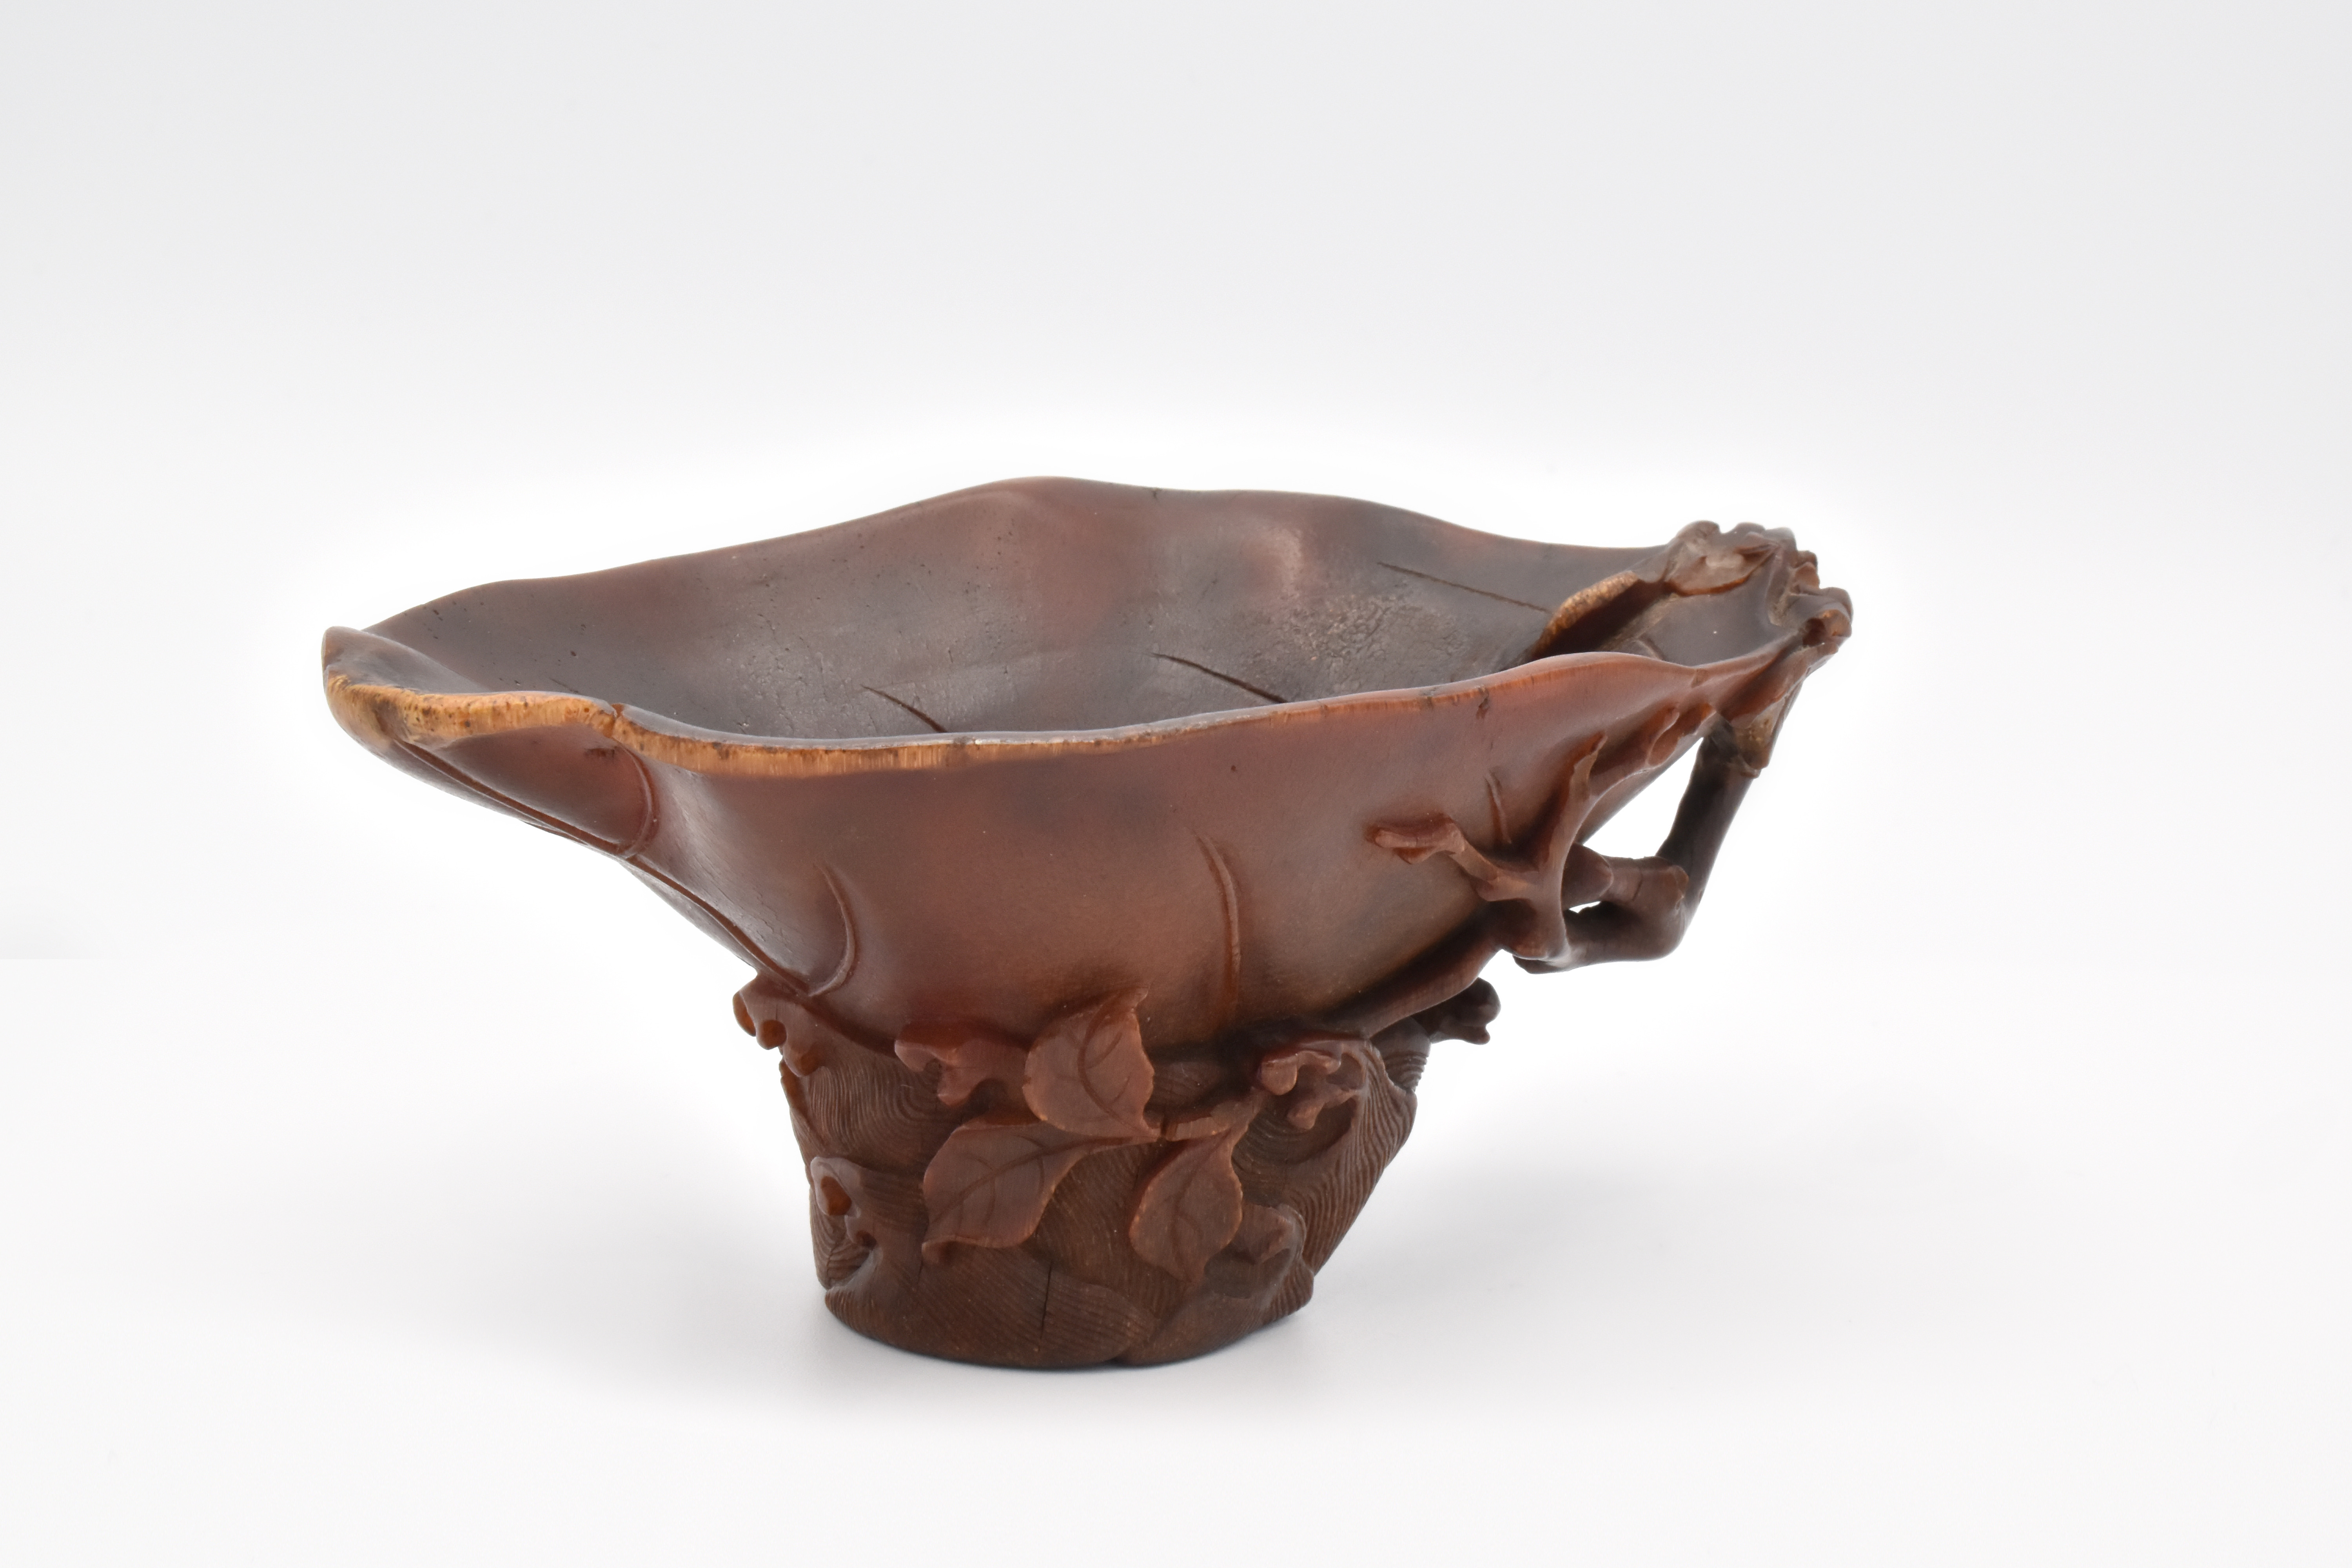 A RARE CHINESE RHINOCEROS HORN ‘CAMELLIA LEAF’ LIBATION CUP, QING DYNASTY, 17TH CENTURY